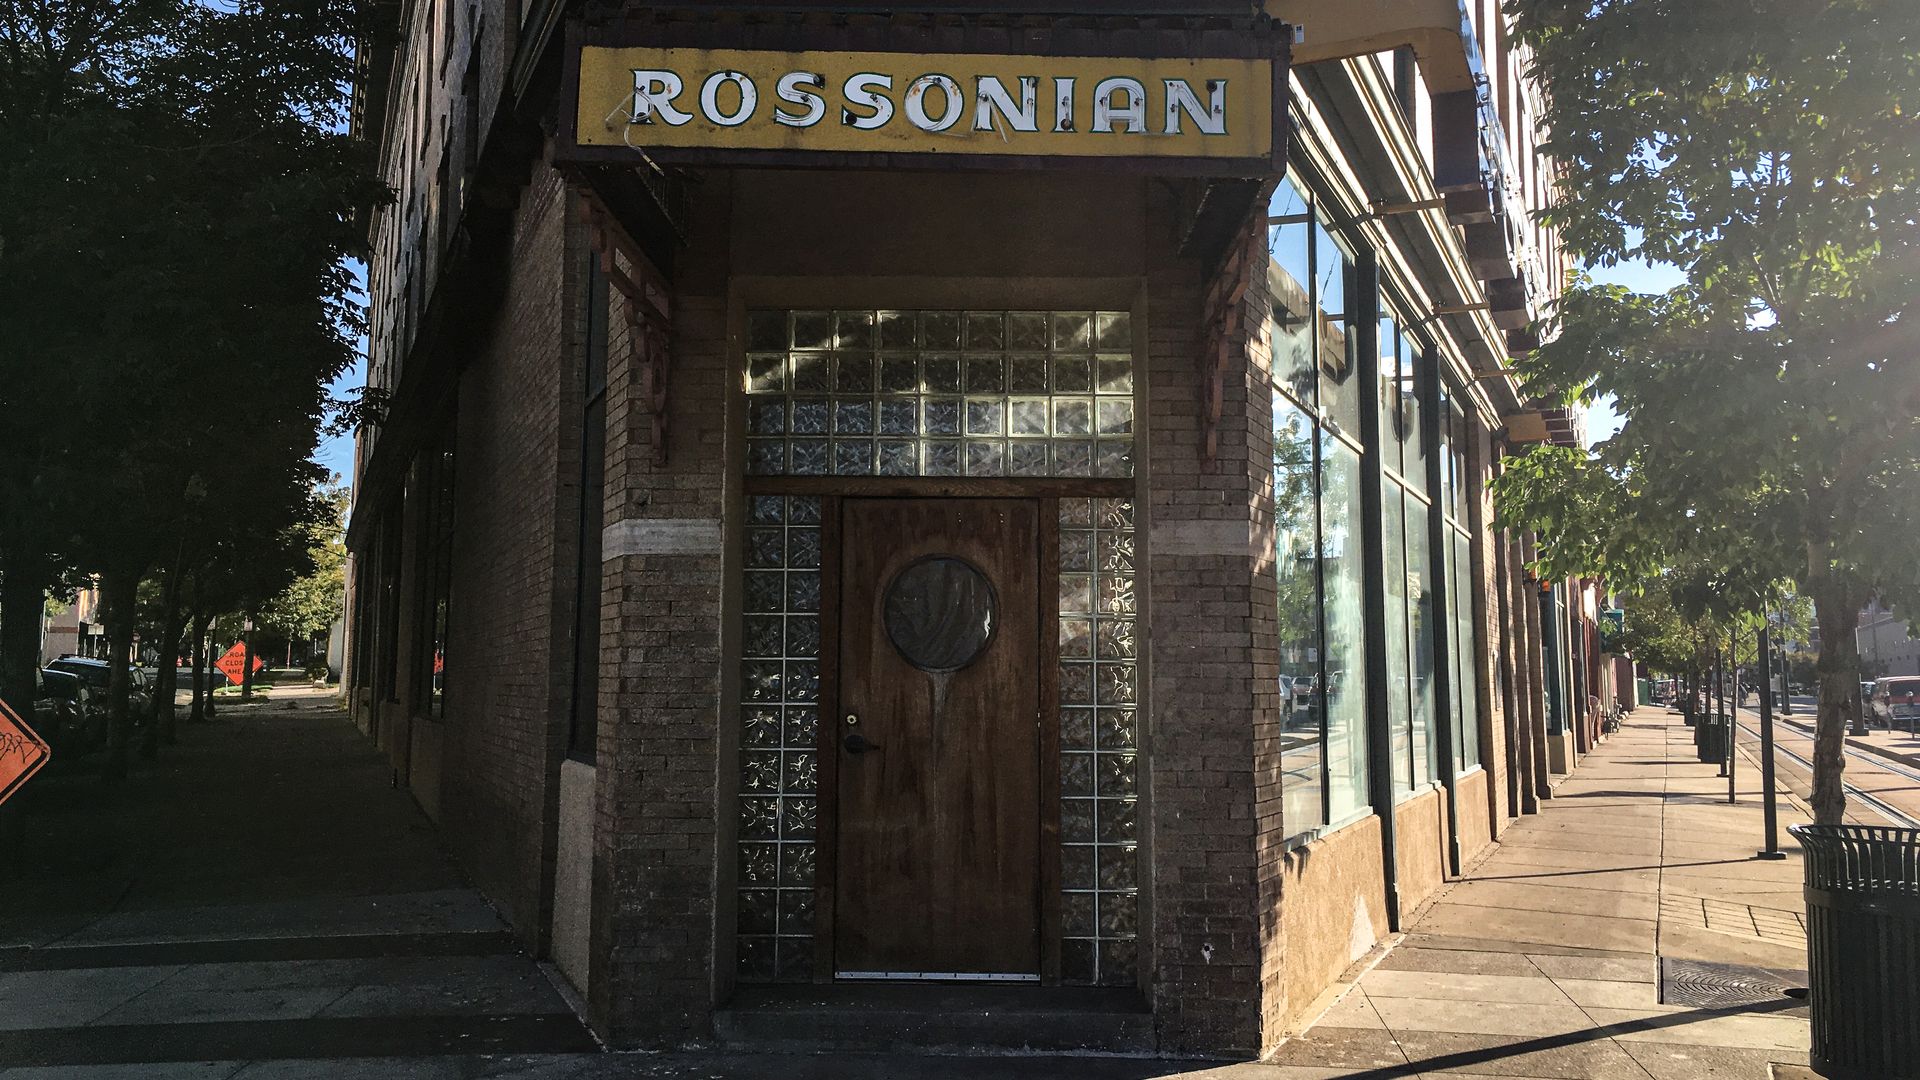 The Rossonian Hotel, once the heart of Black Denver's Five Point neighborhood, sits empty.